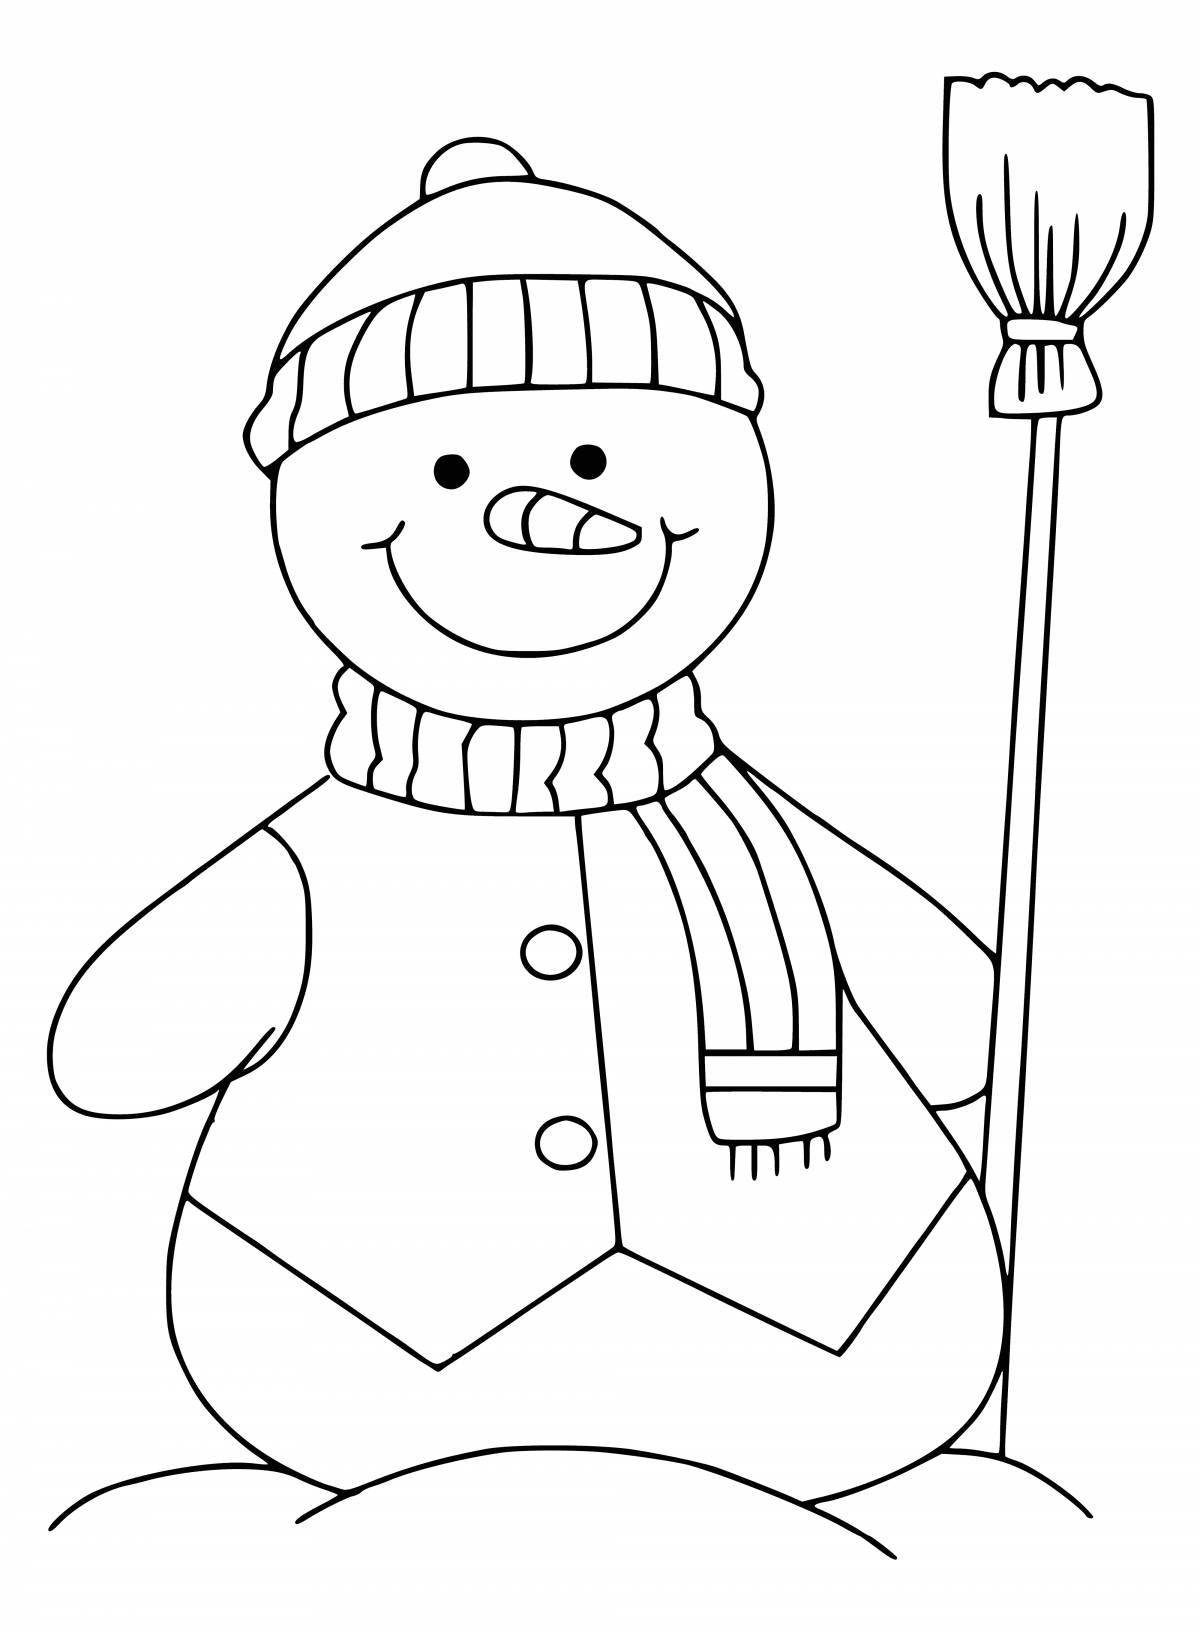 Live coloring funny snowman